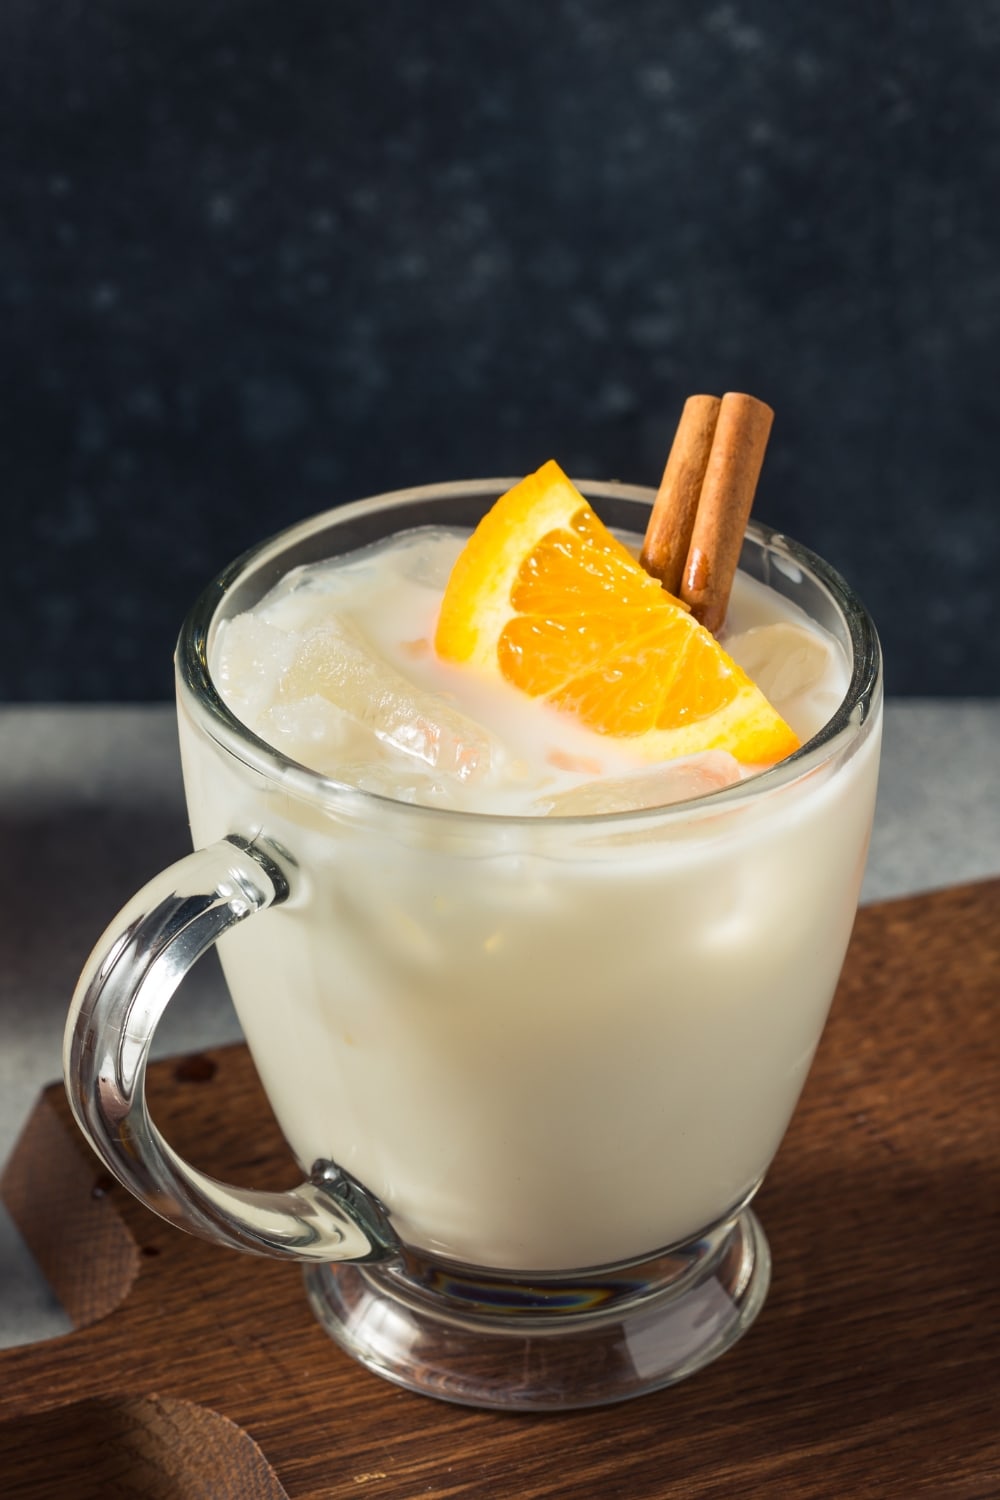 Refreshing Milk and Honey Cocktail with Orange and Cinnamon